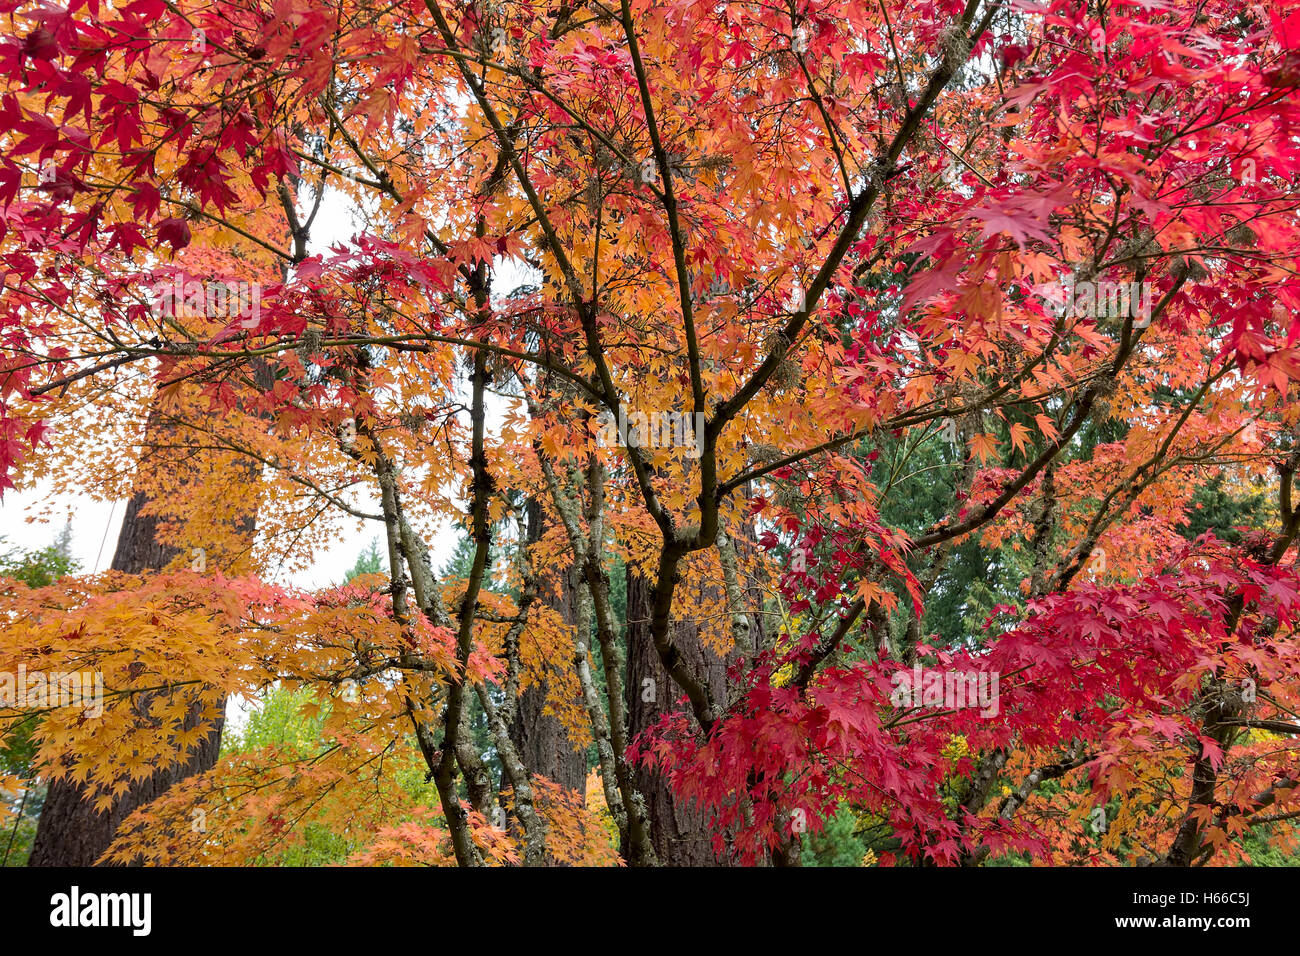 Japanese Maple Trees in fall color during Autumn Season Stock Photo